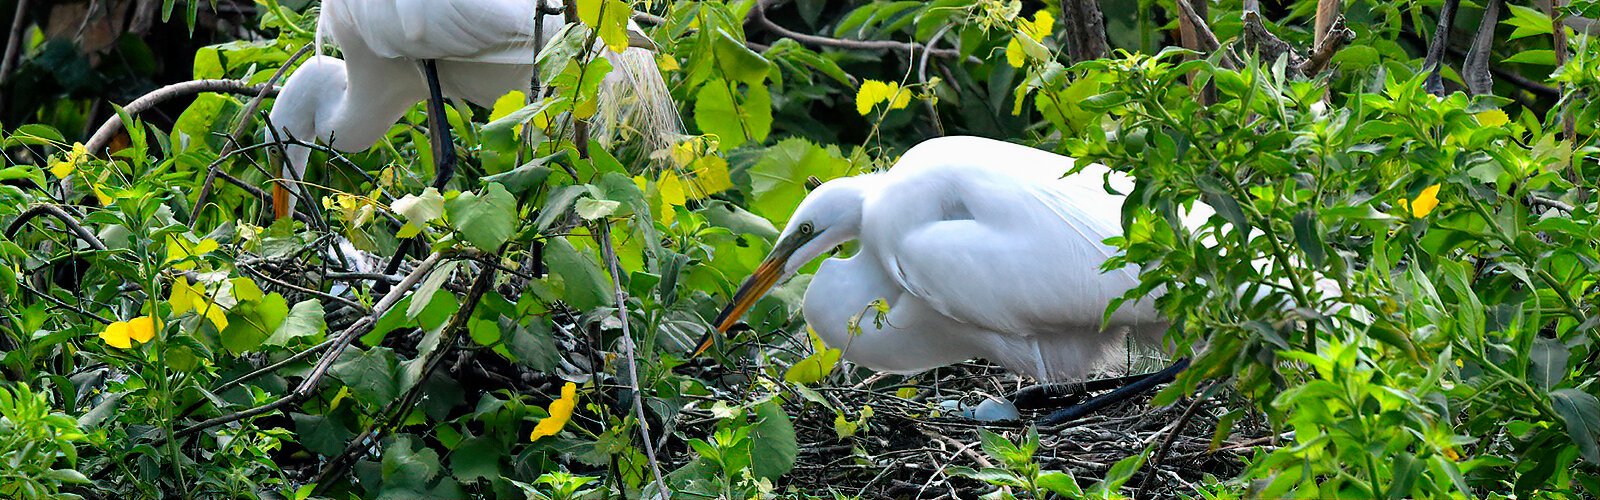 Great egrets nest in rookeries with other wading birds, usually surrounded by water as a precaution against predators like raccoons. Both parents take turns incubating their blue eggs for about four weeks.